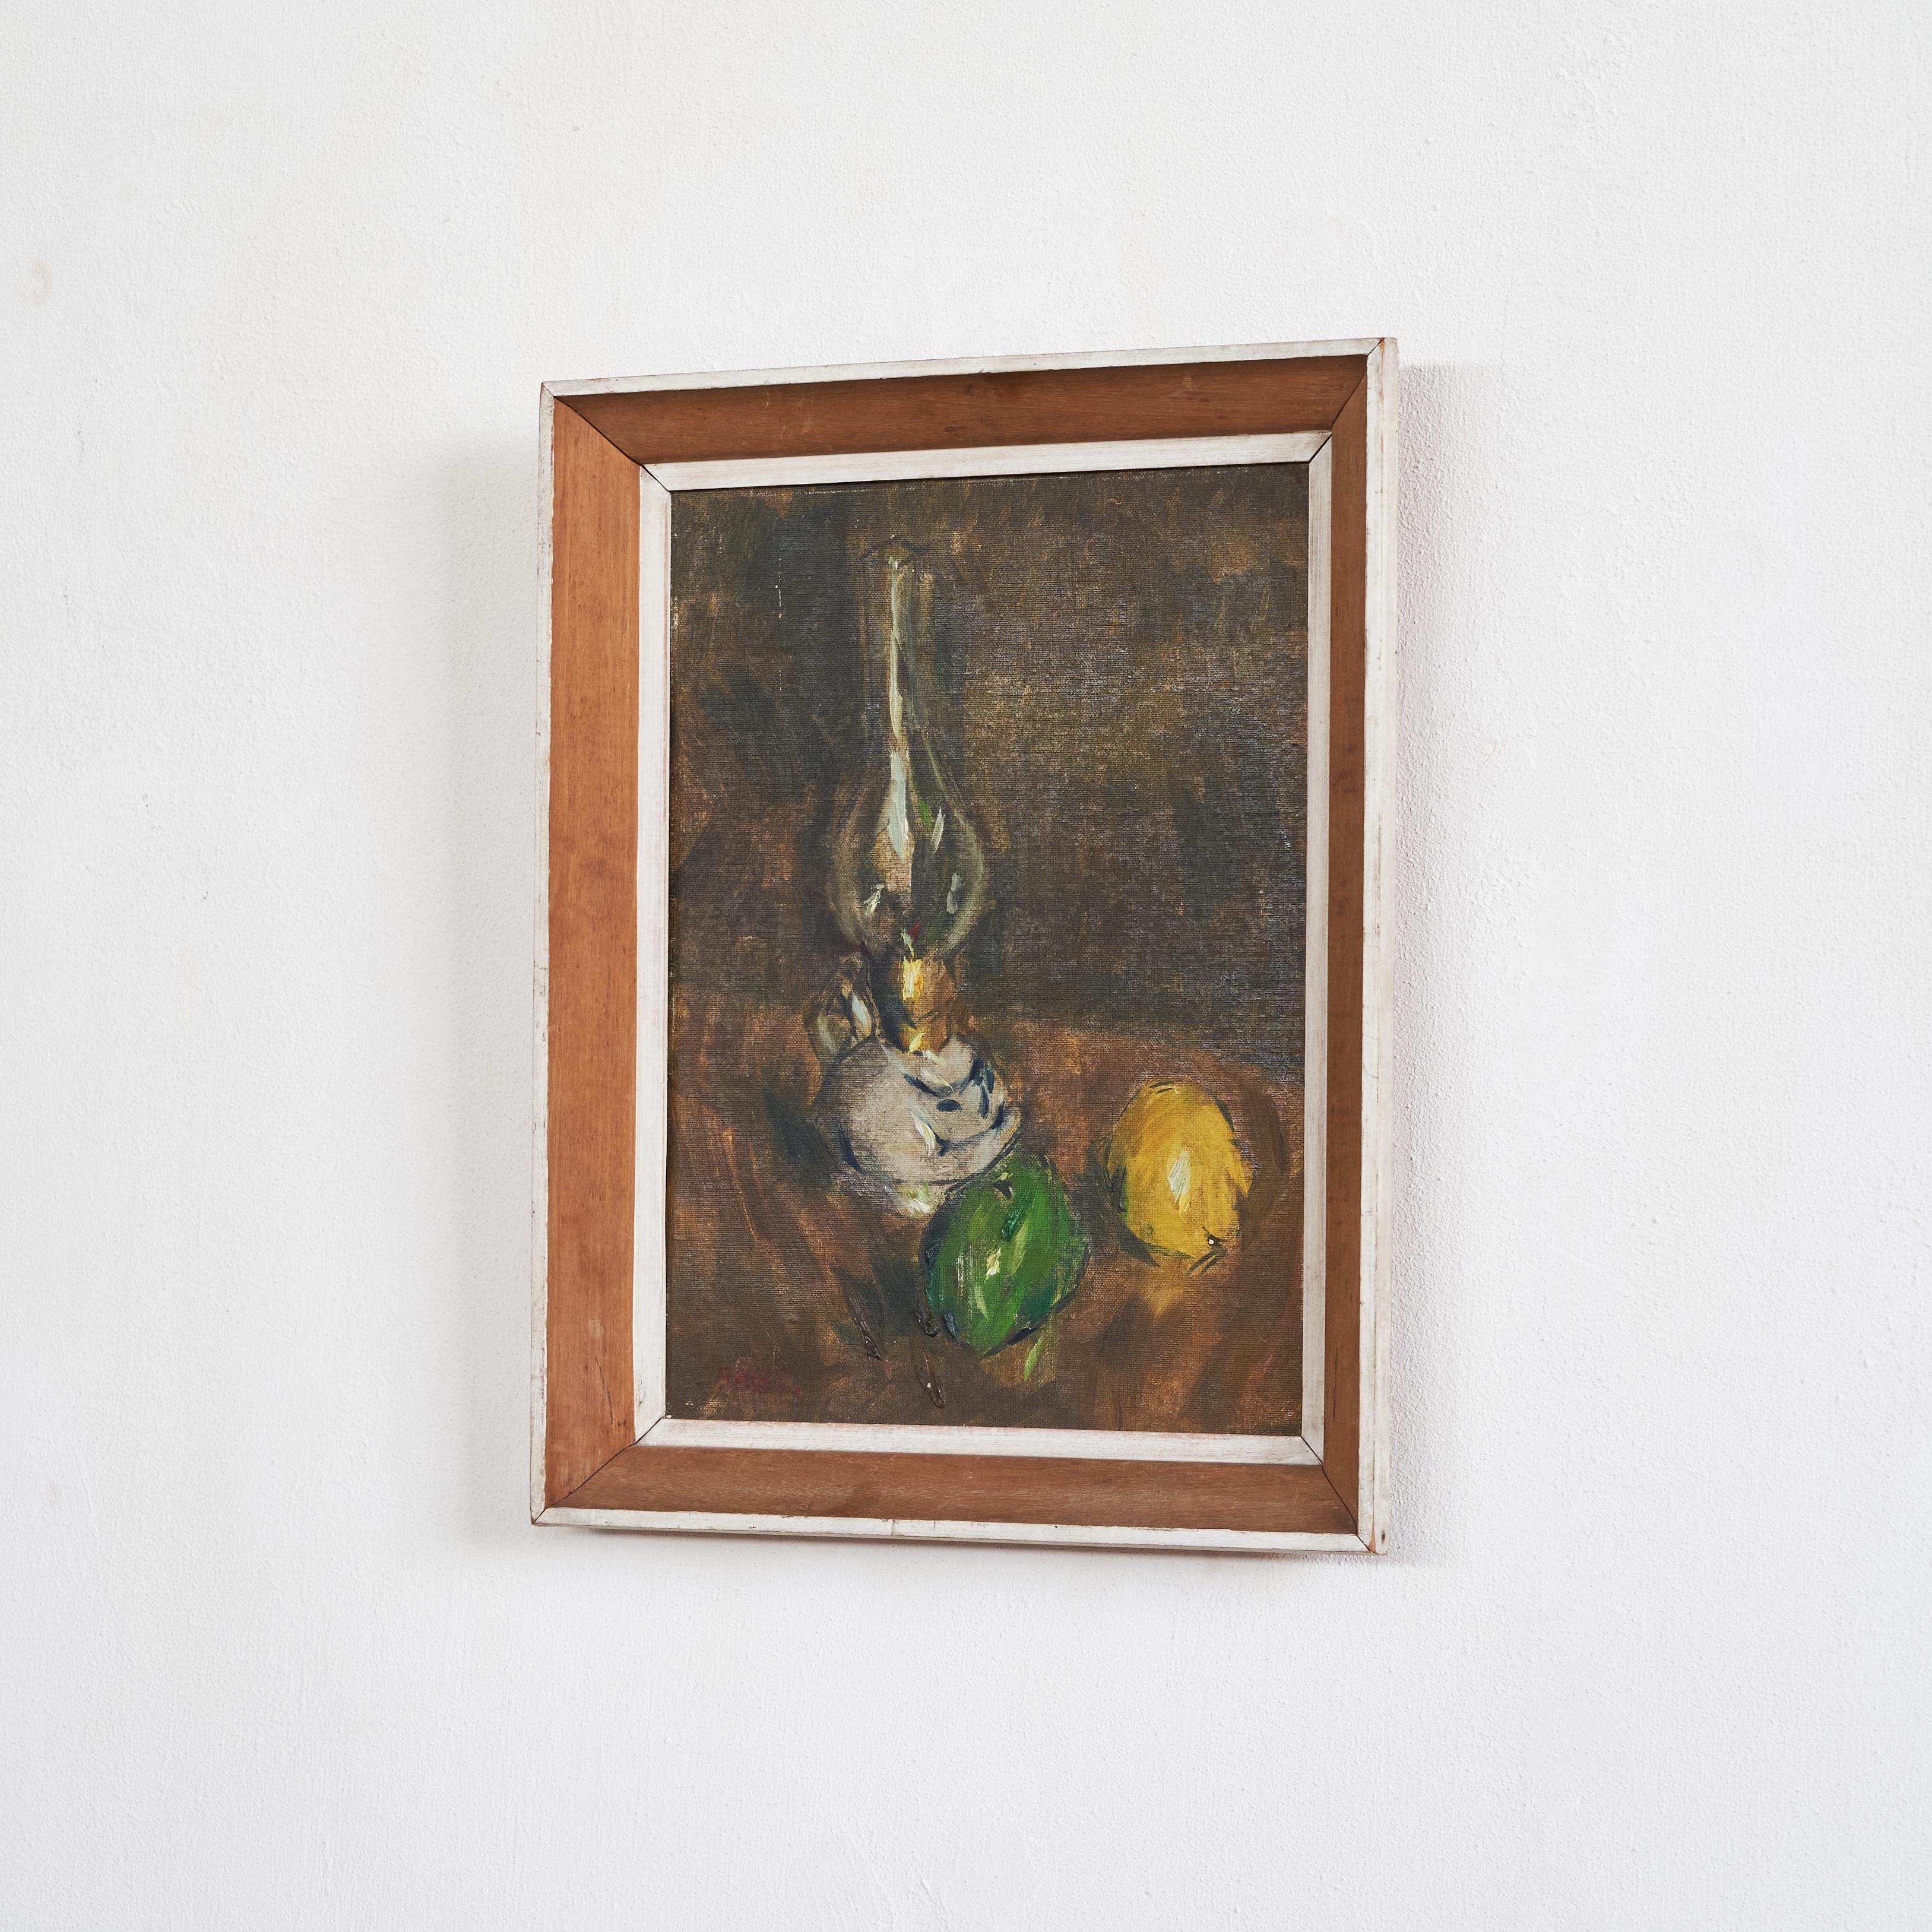 Gustave de Smet 'Still Life with Oil Lamp and Fruit' Oil on Board 1930s For Sale 2